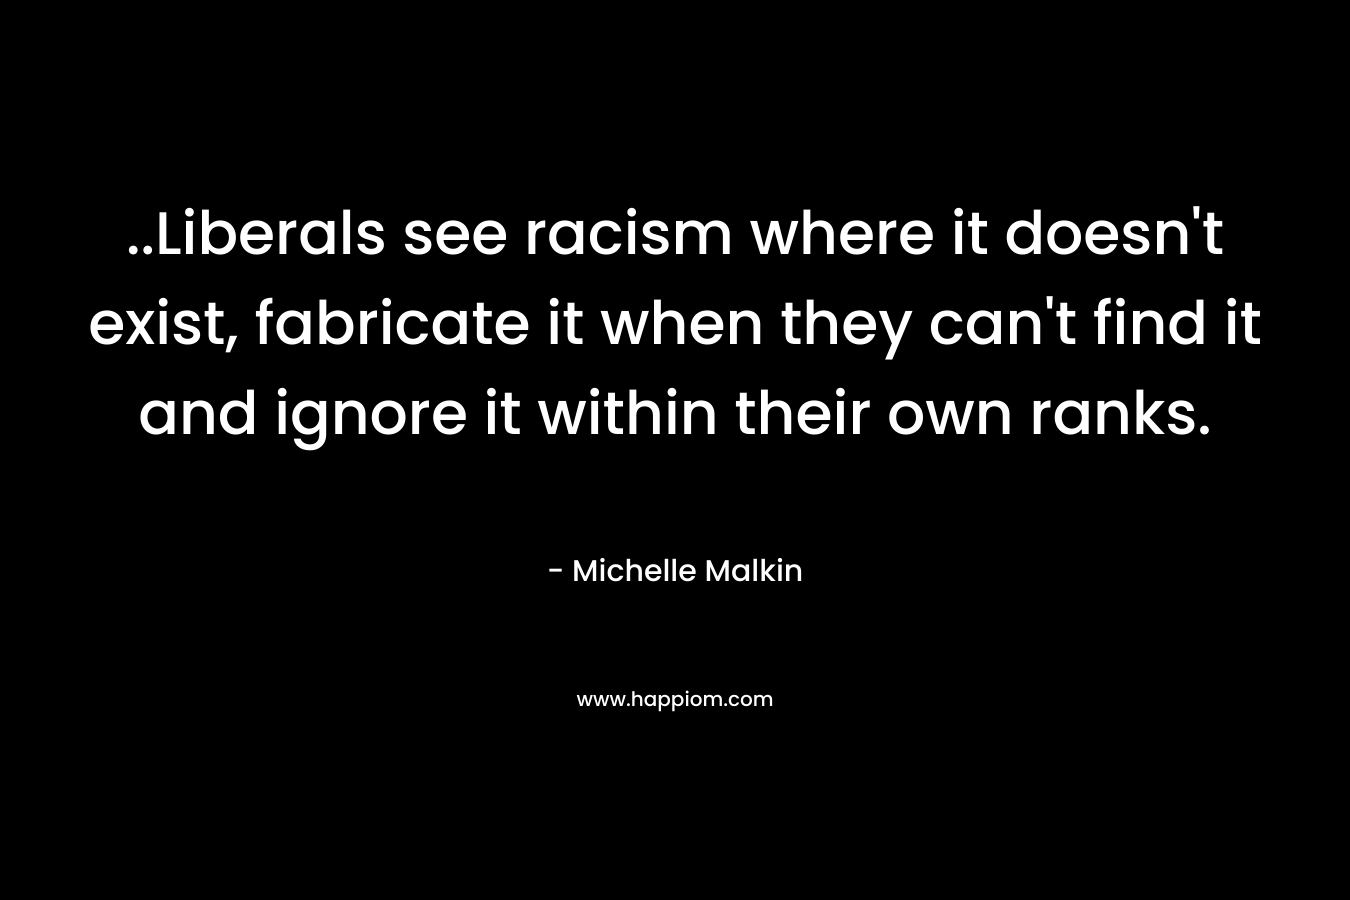 ..Liberals see racism where it doesn’t exist, fabricate it when they can’t find it and ignore it within their own ranks. – Michelle Malkin